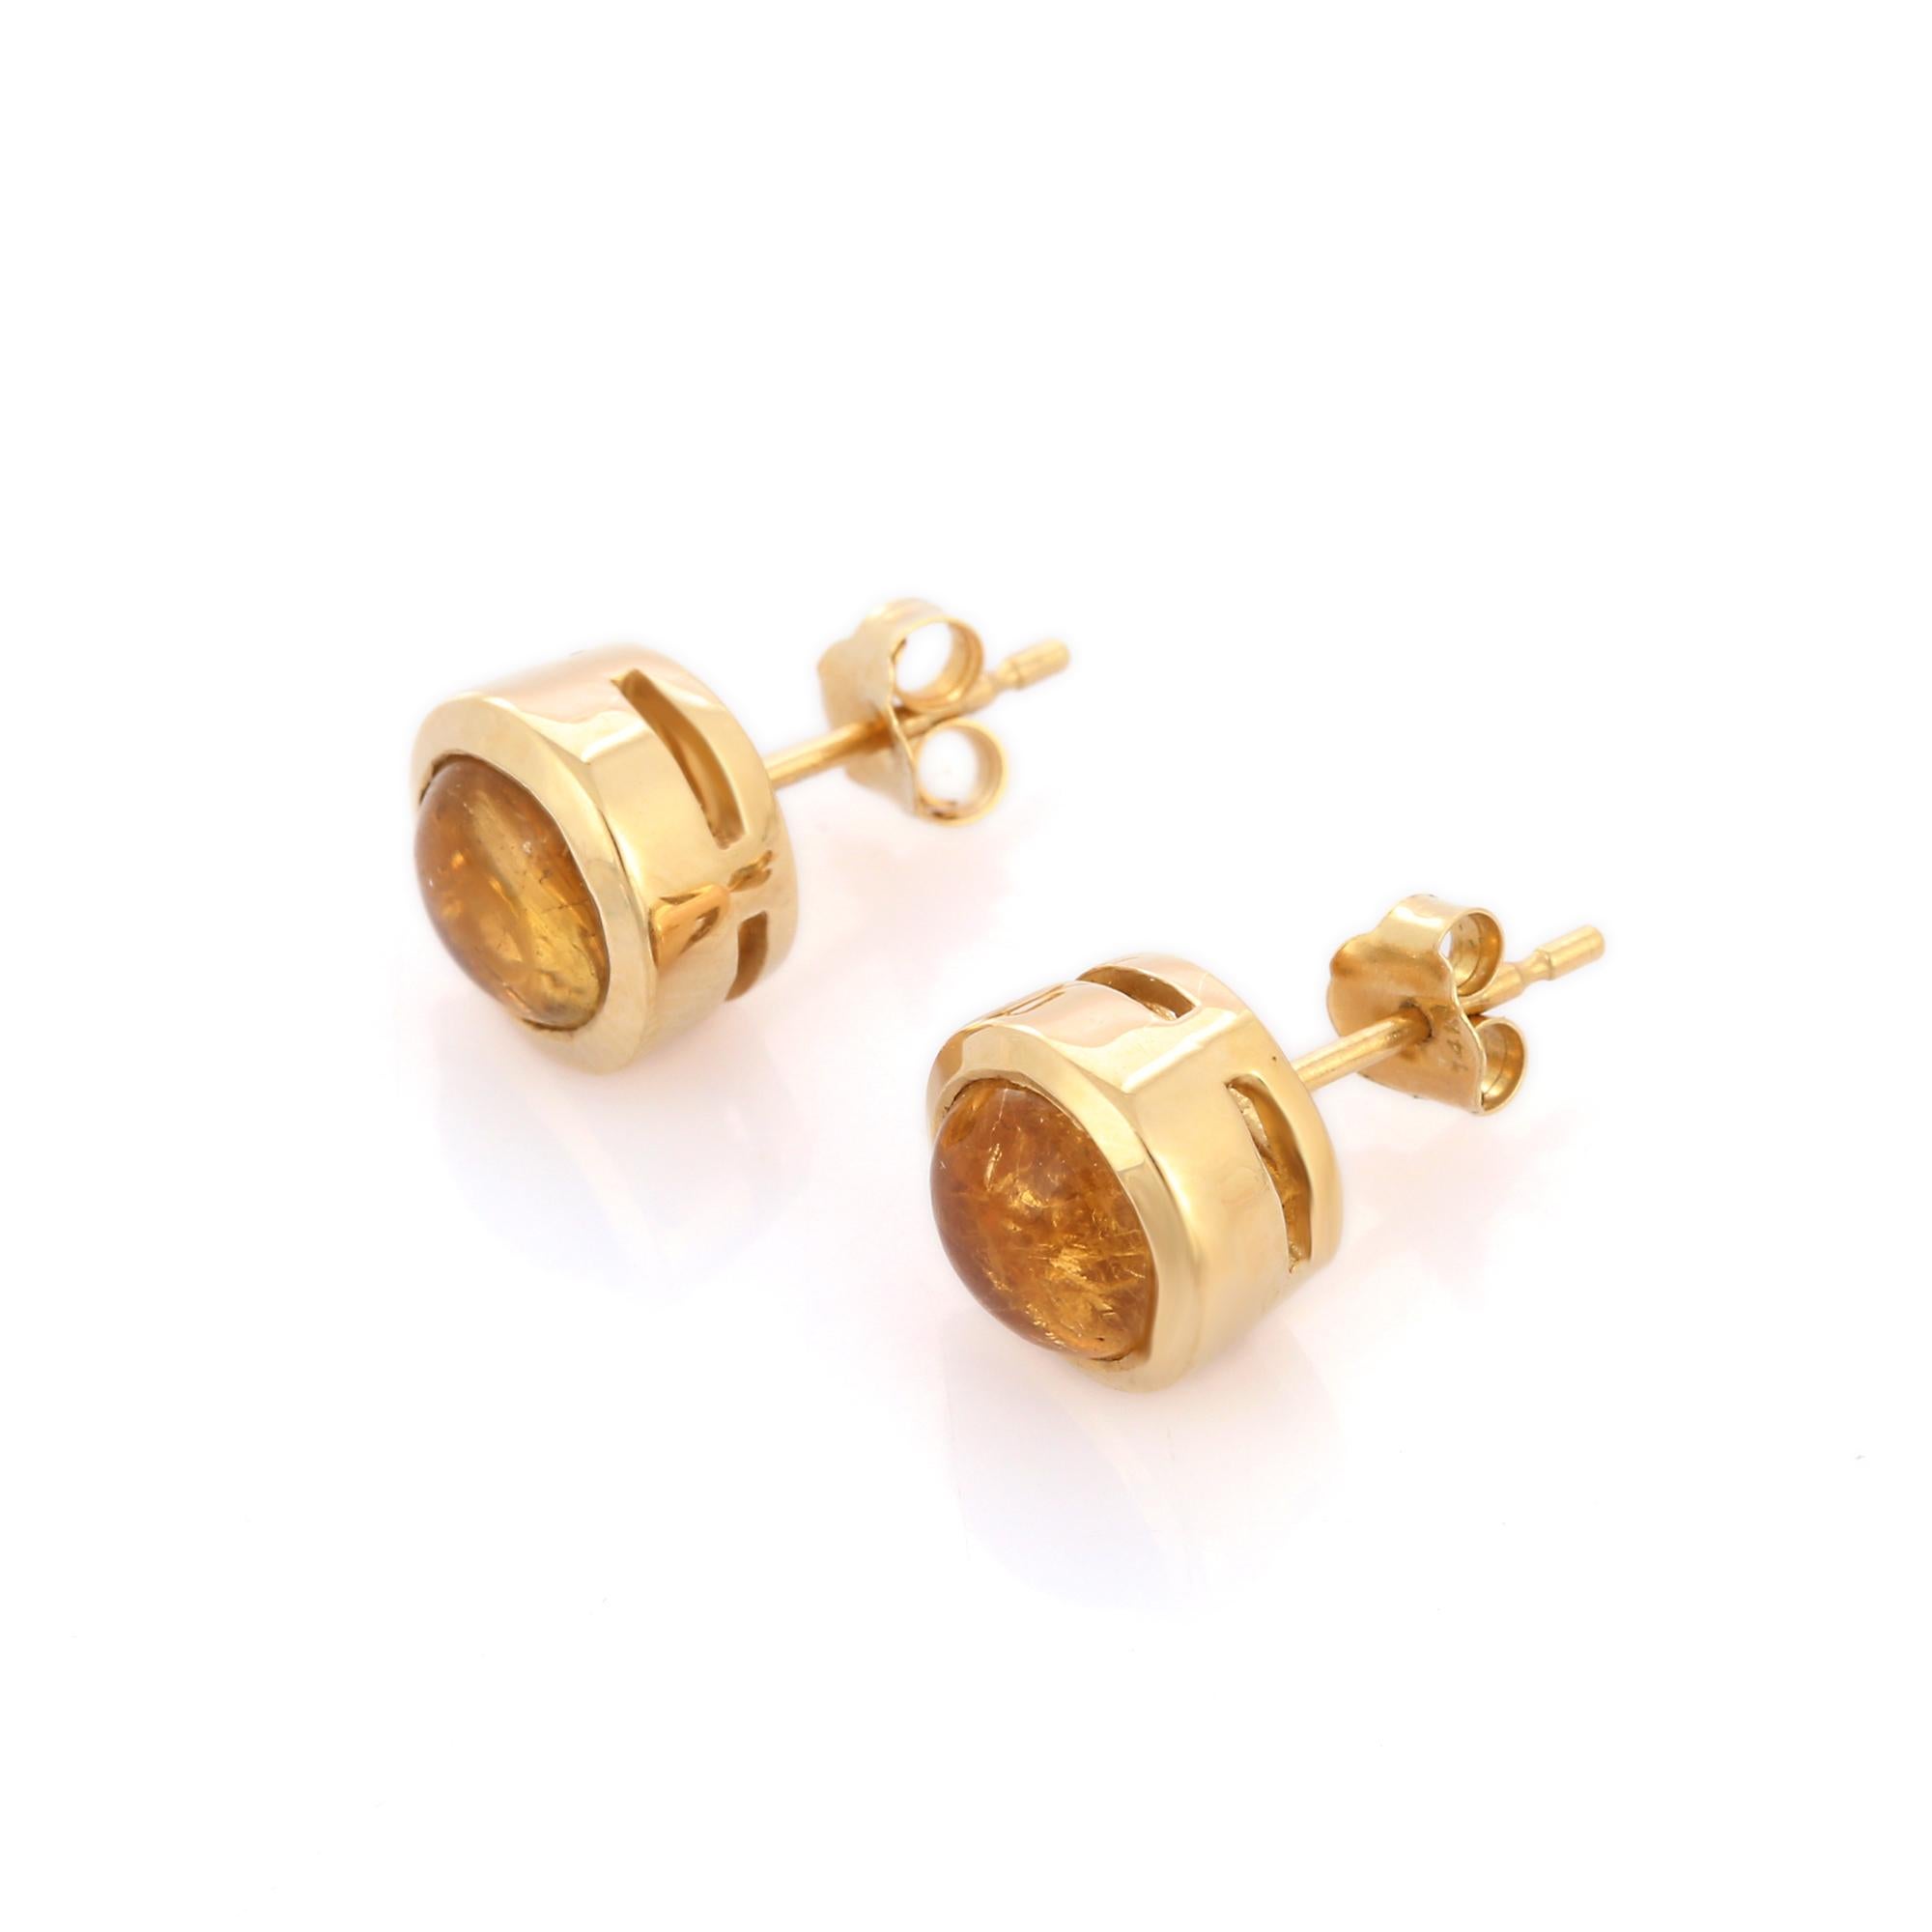 Studs create a subtle beauty while showcasing the colors of the natural precious gemstones making a statement.
Round cut citrine earrings stud in 14K gold. Embrace your look with these stunning pair of earrings suitable for any occasion to complete